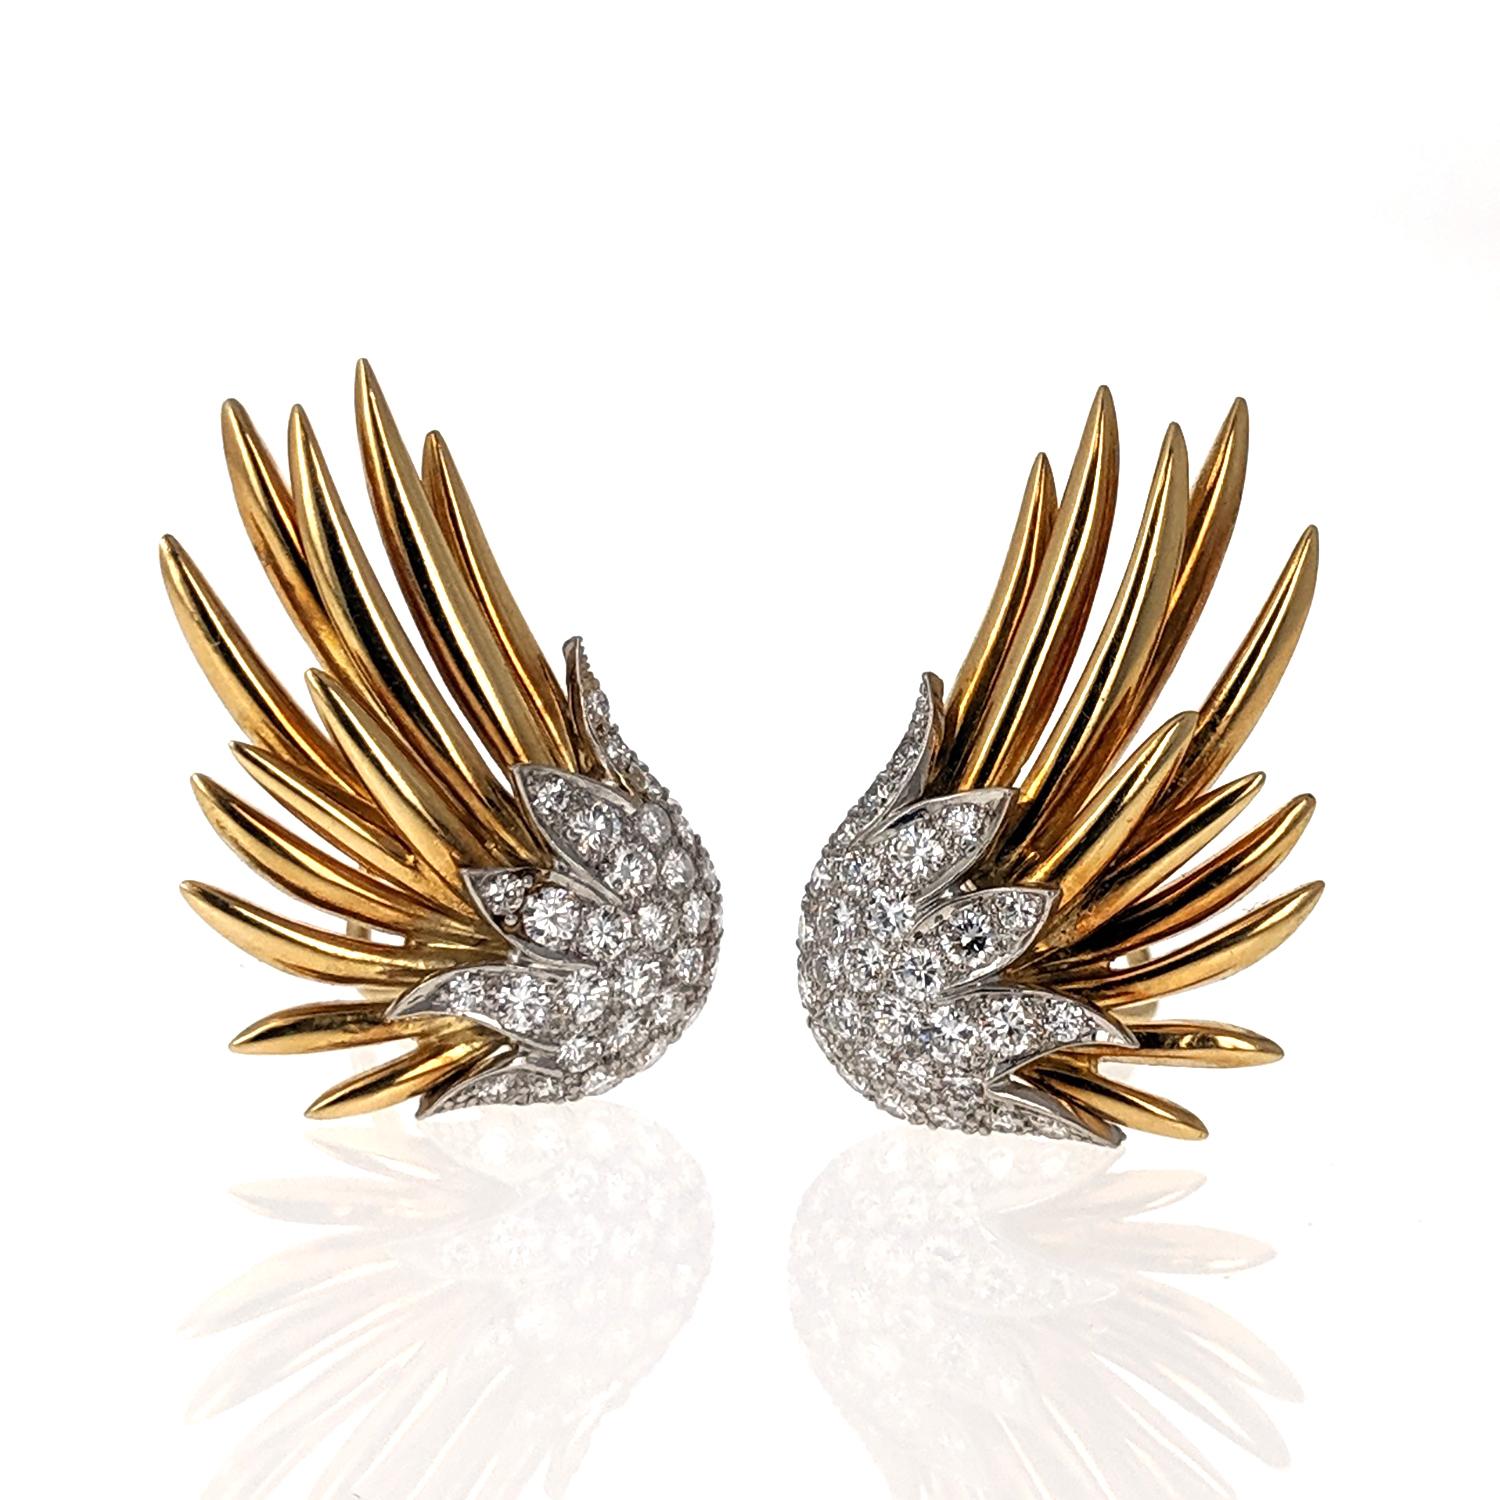 These chic Paris Flame ear clip earrings are set with round diamonds of approximately 1.25 carats total. They are mounted in 18 karat gold. The are signed Tiffany Schlumberger and were made circa 1970.
One post removed.